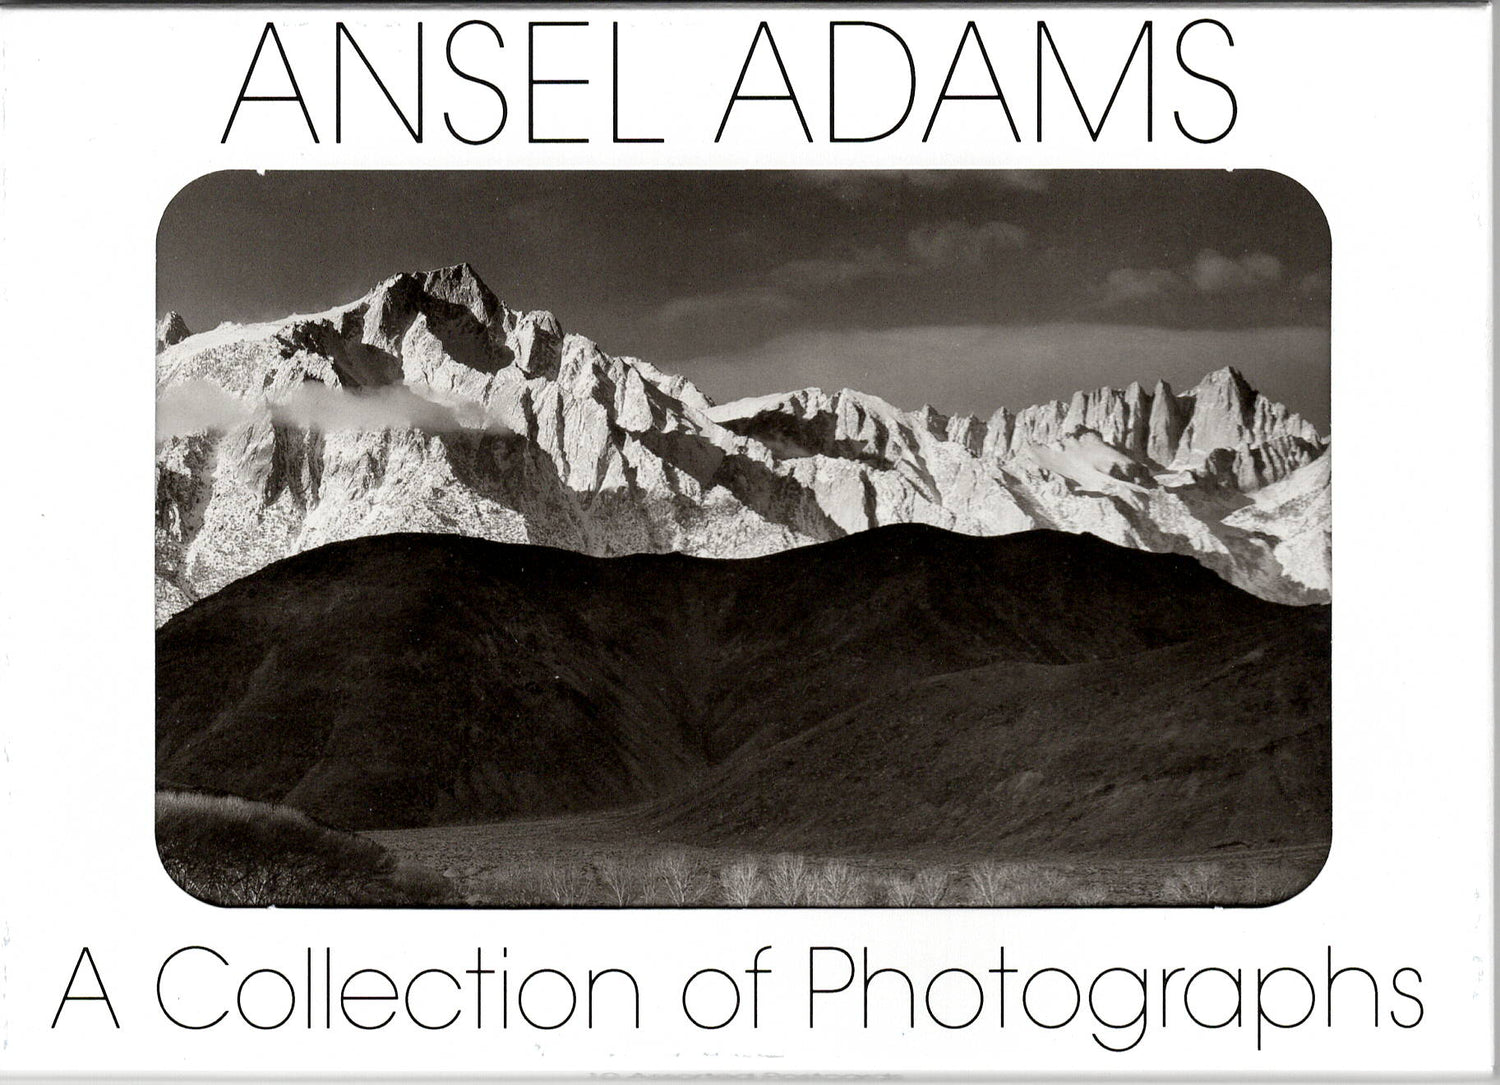 "A COLLECTION OF PHOTOGRAPHS" - ANSEL ADAMS SMALL POSTCARD SET (10 ASSORTED POSTCARDS)